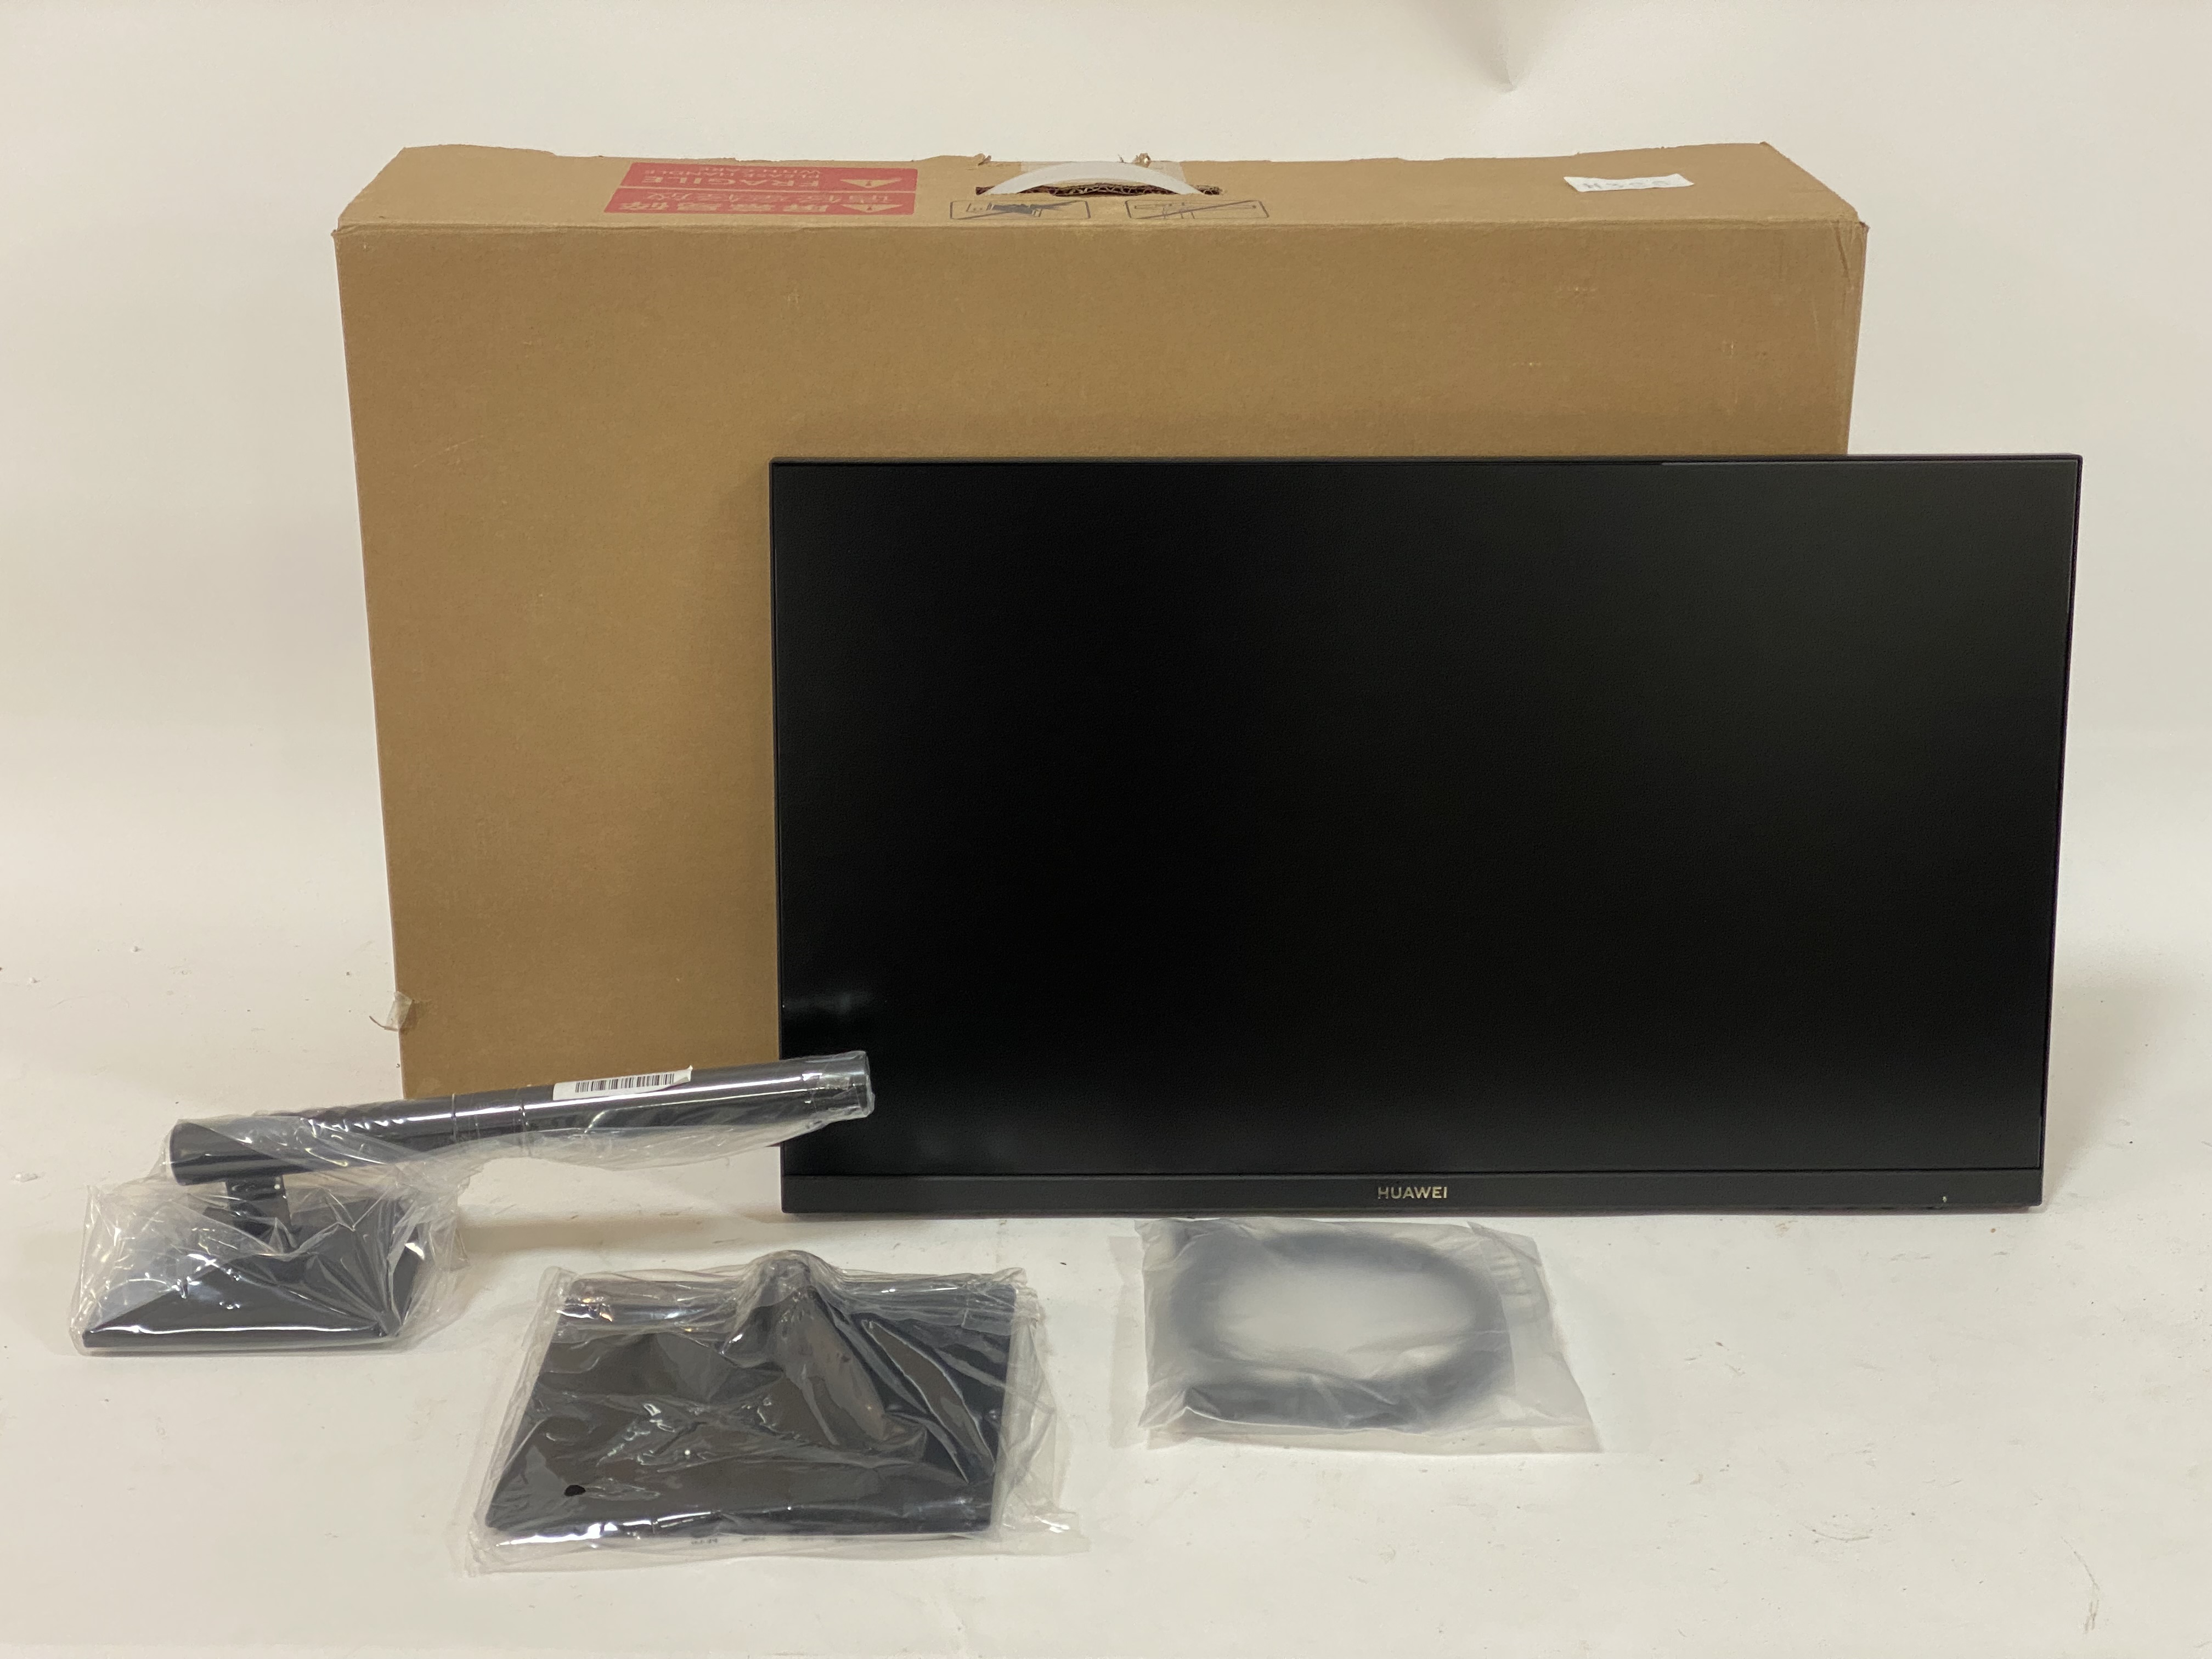 A Huawei computer monitor in box (as new)